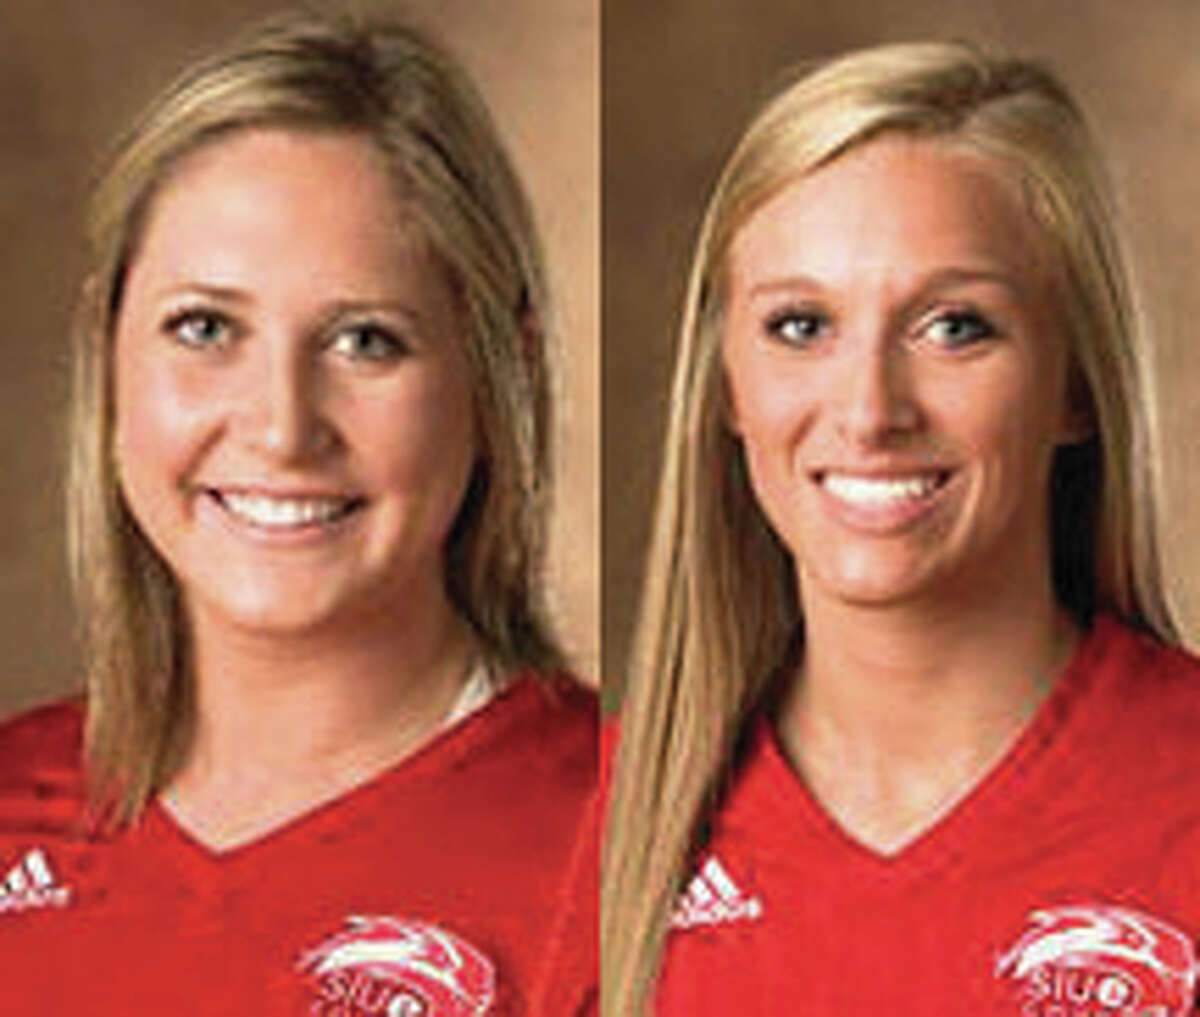 SIUE’s Taylor Joens (left) and Katie Shashack